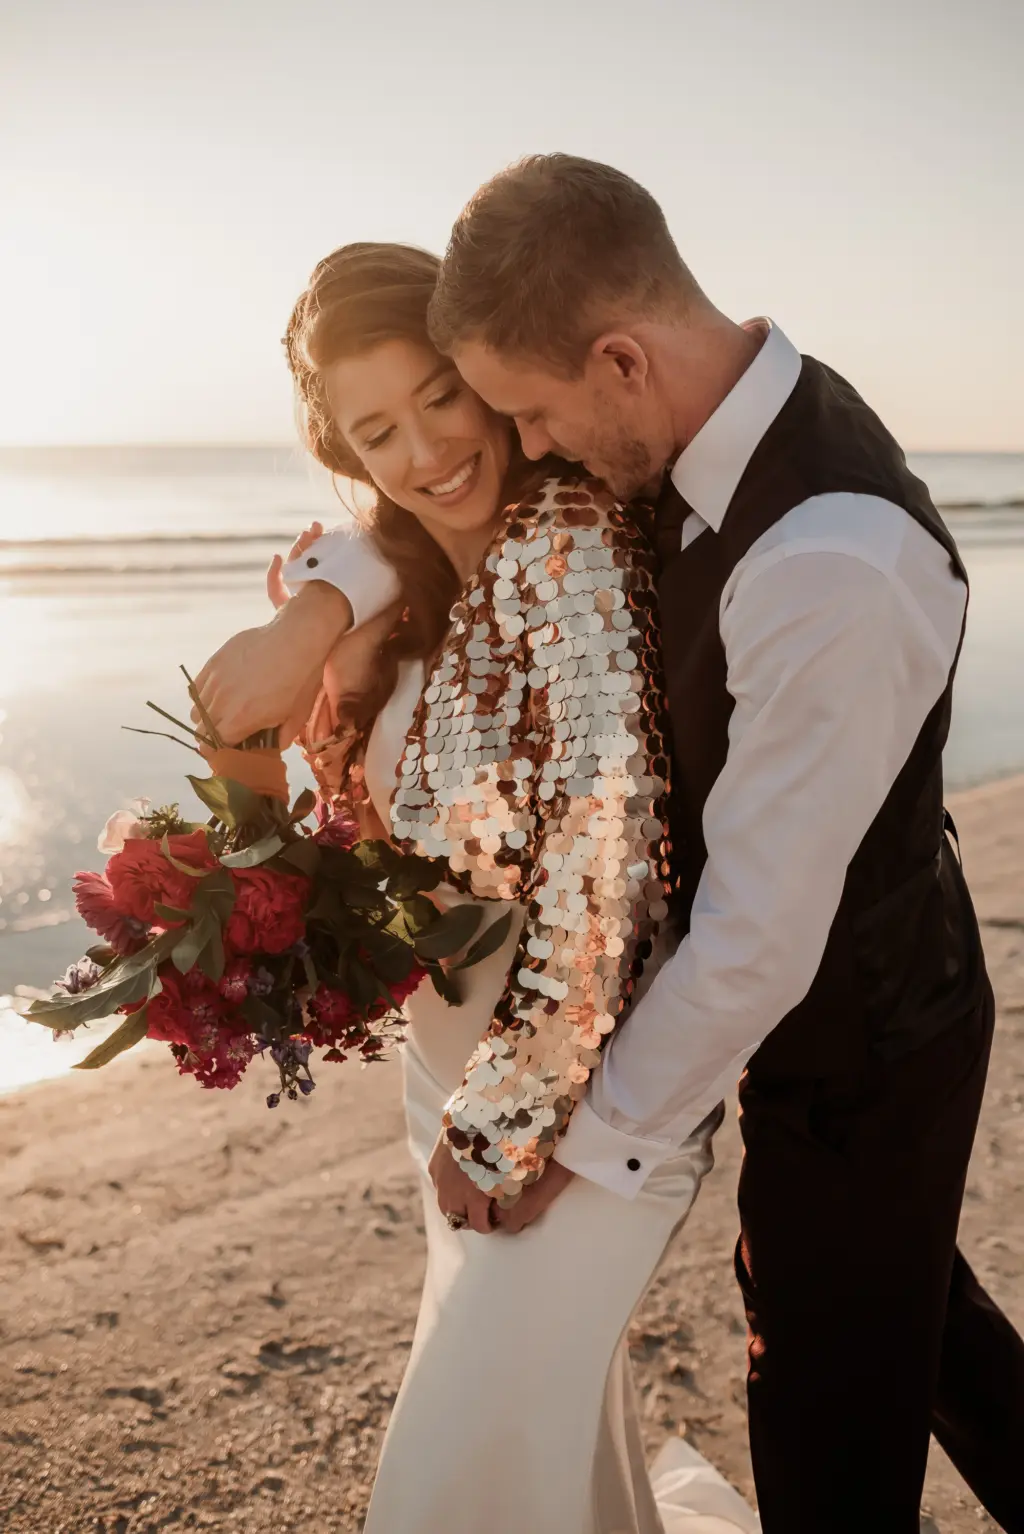 Bright in Sequin Offbeat Bridal Jacket with Groom in Intimate Bridal Portrait on the Beach